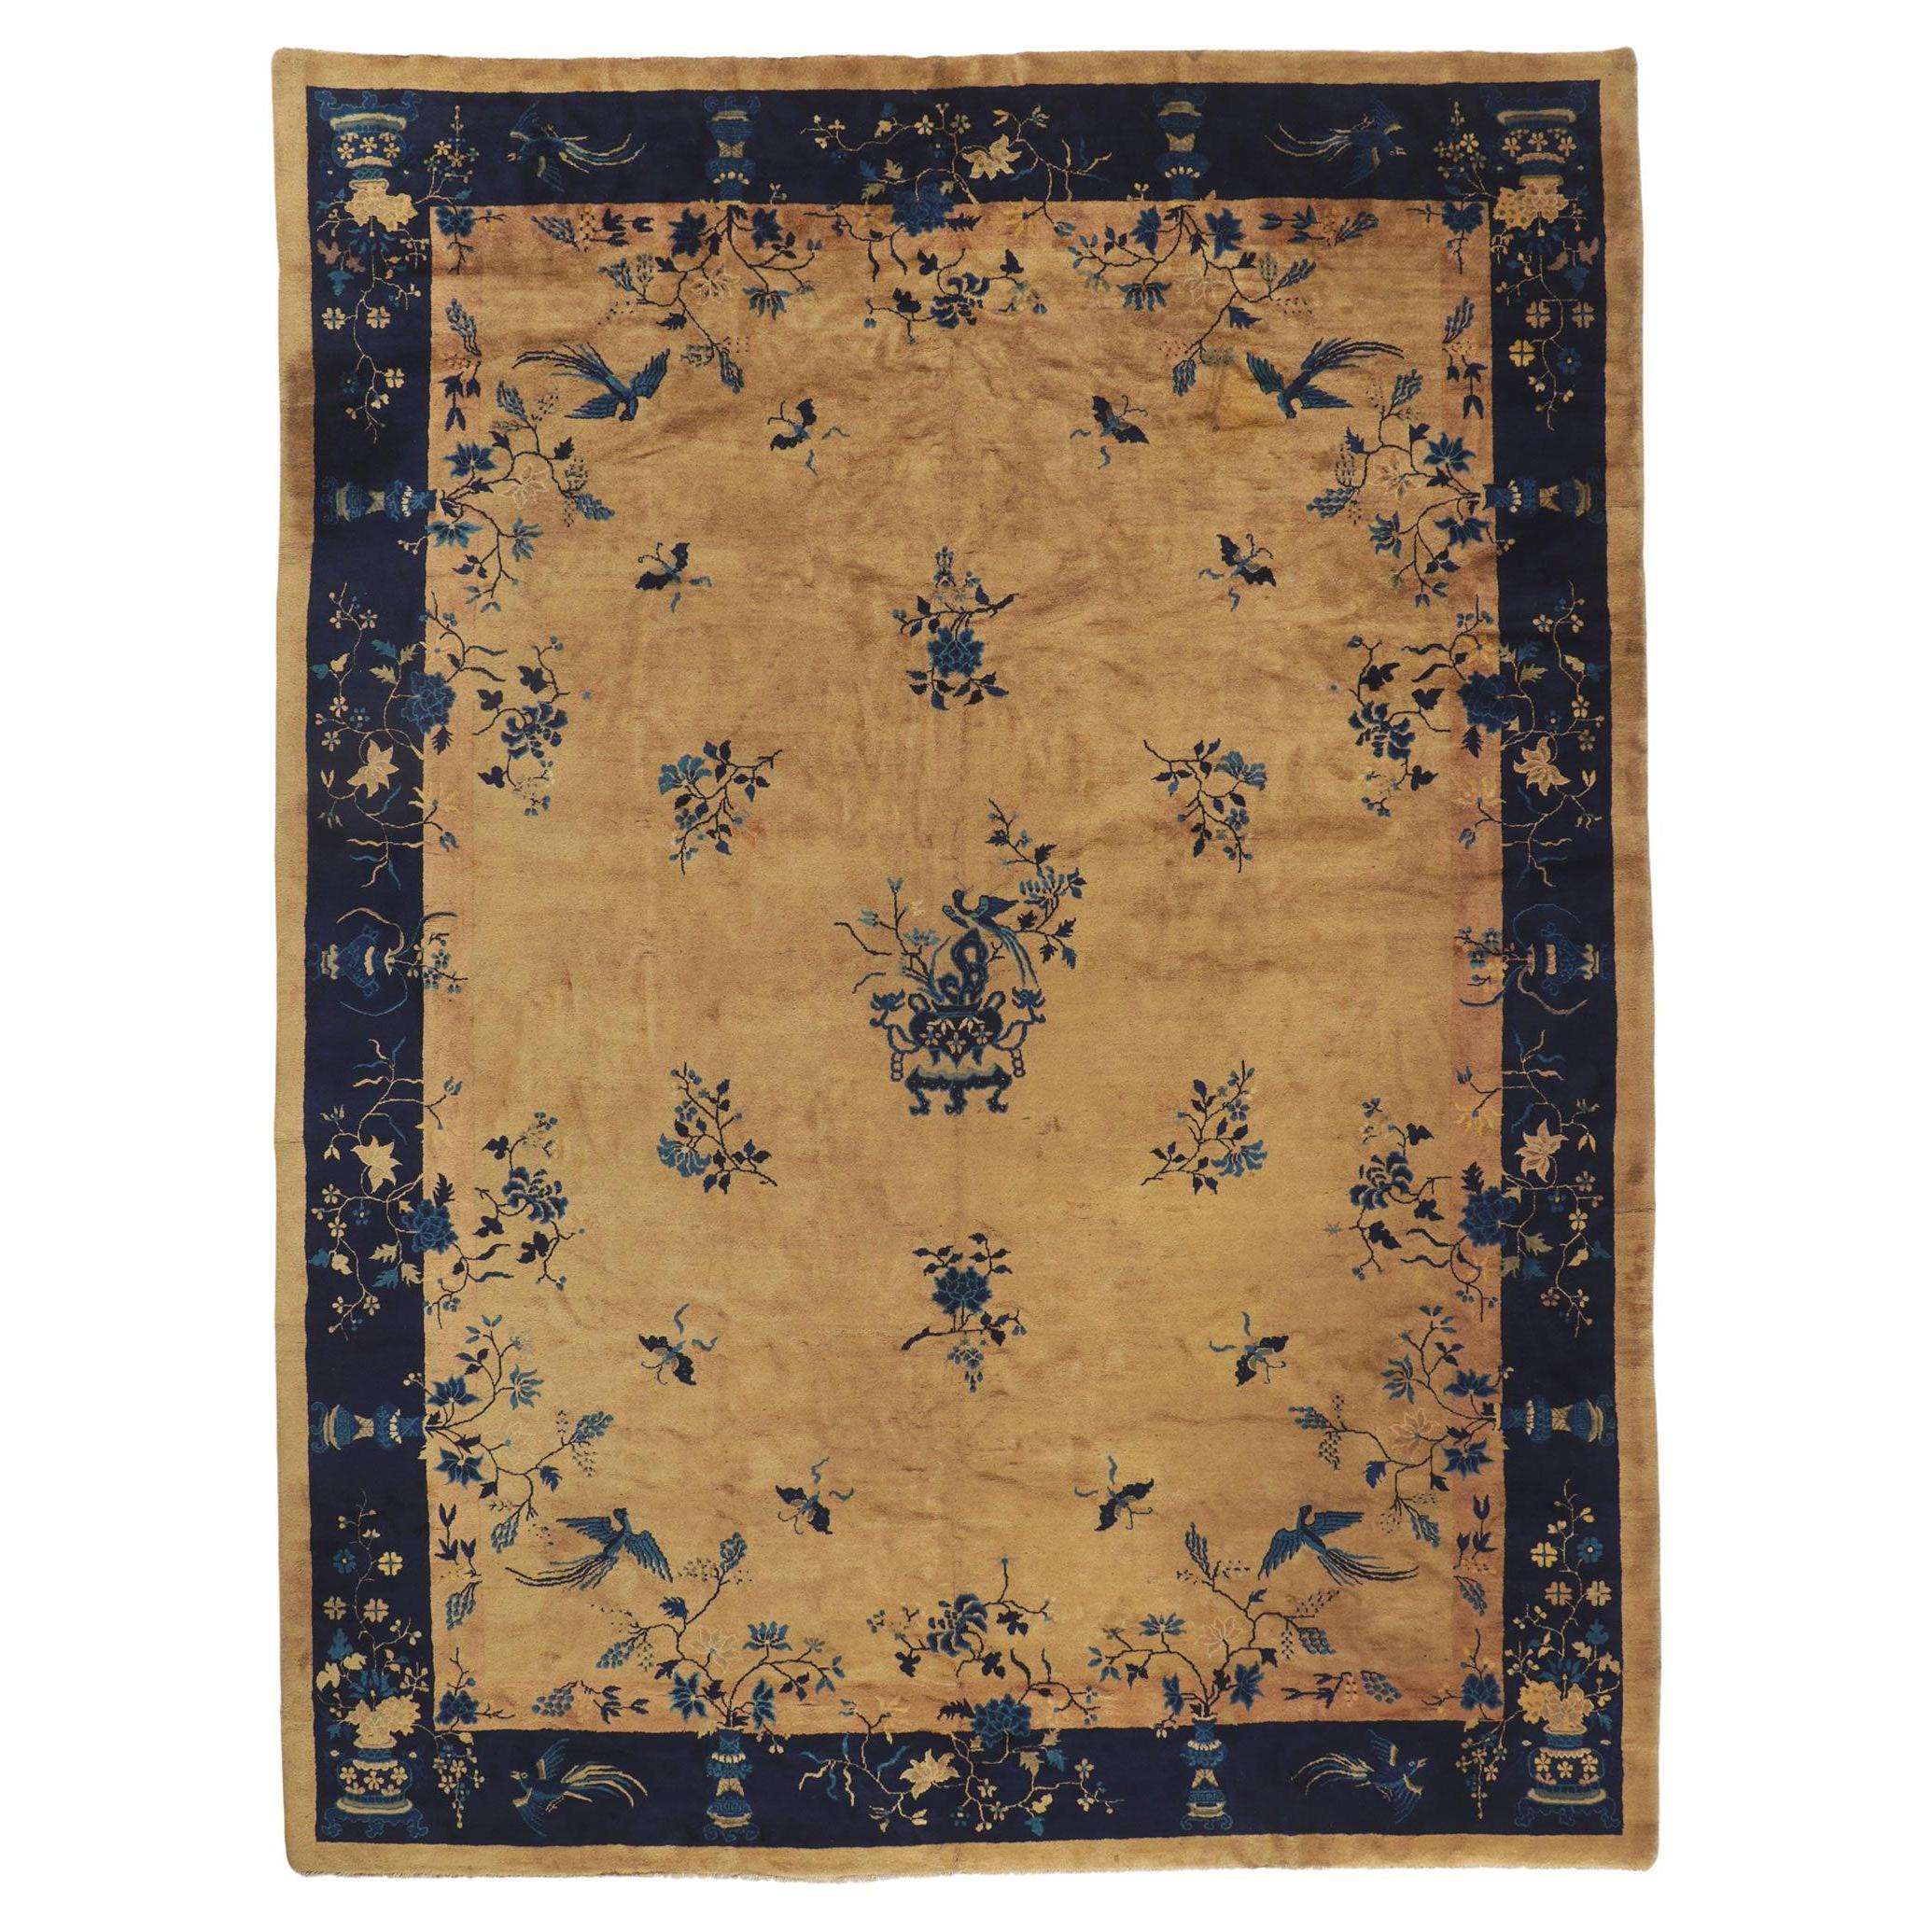 Antique Chinese Peking Rug, Chinoiserie Chic Meets Regal Decadence